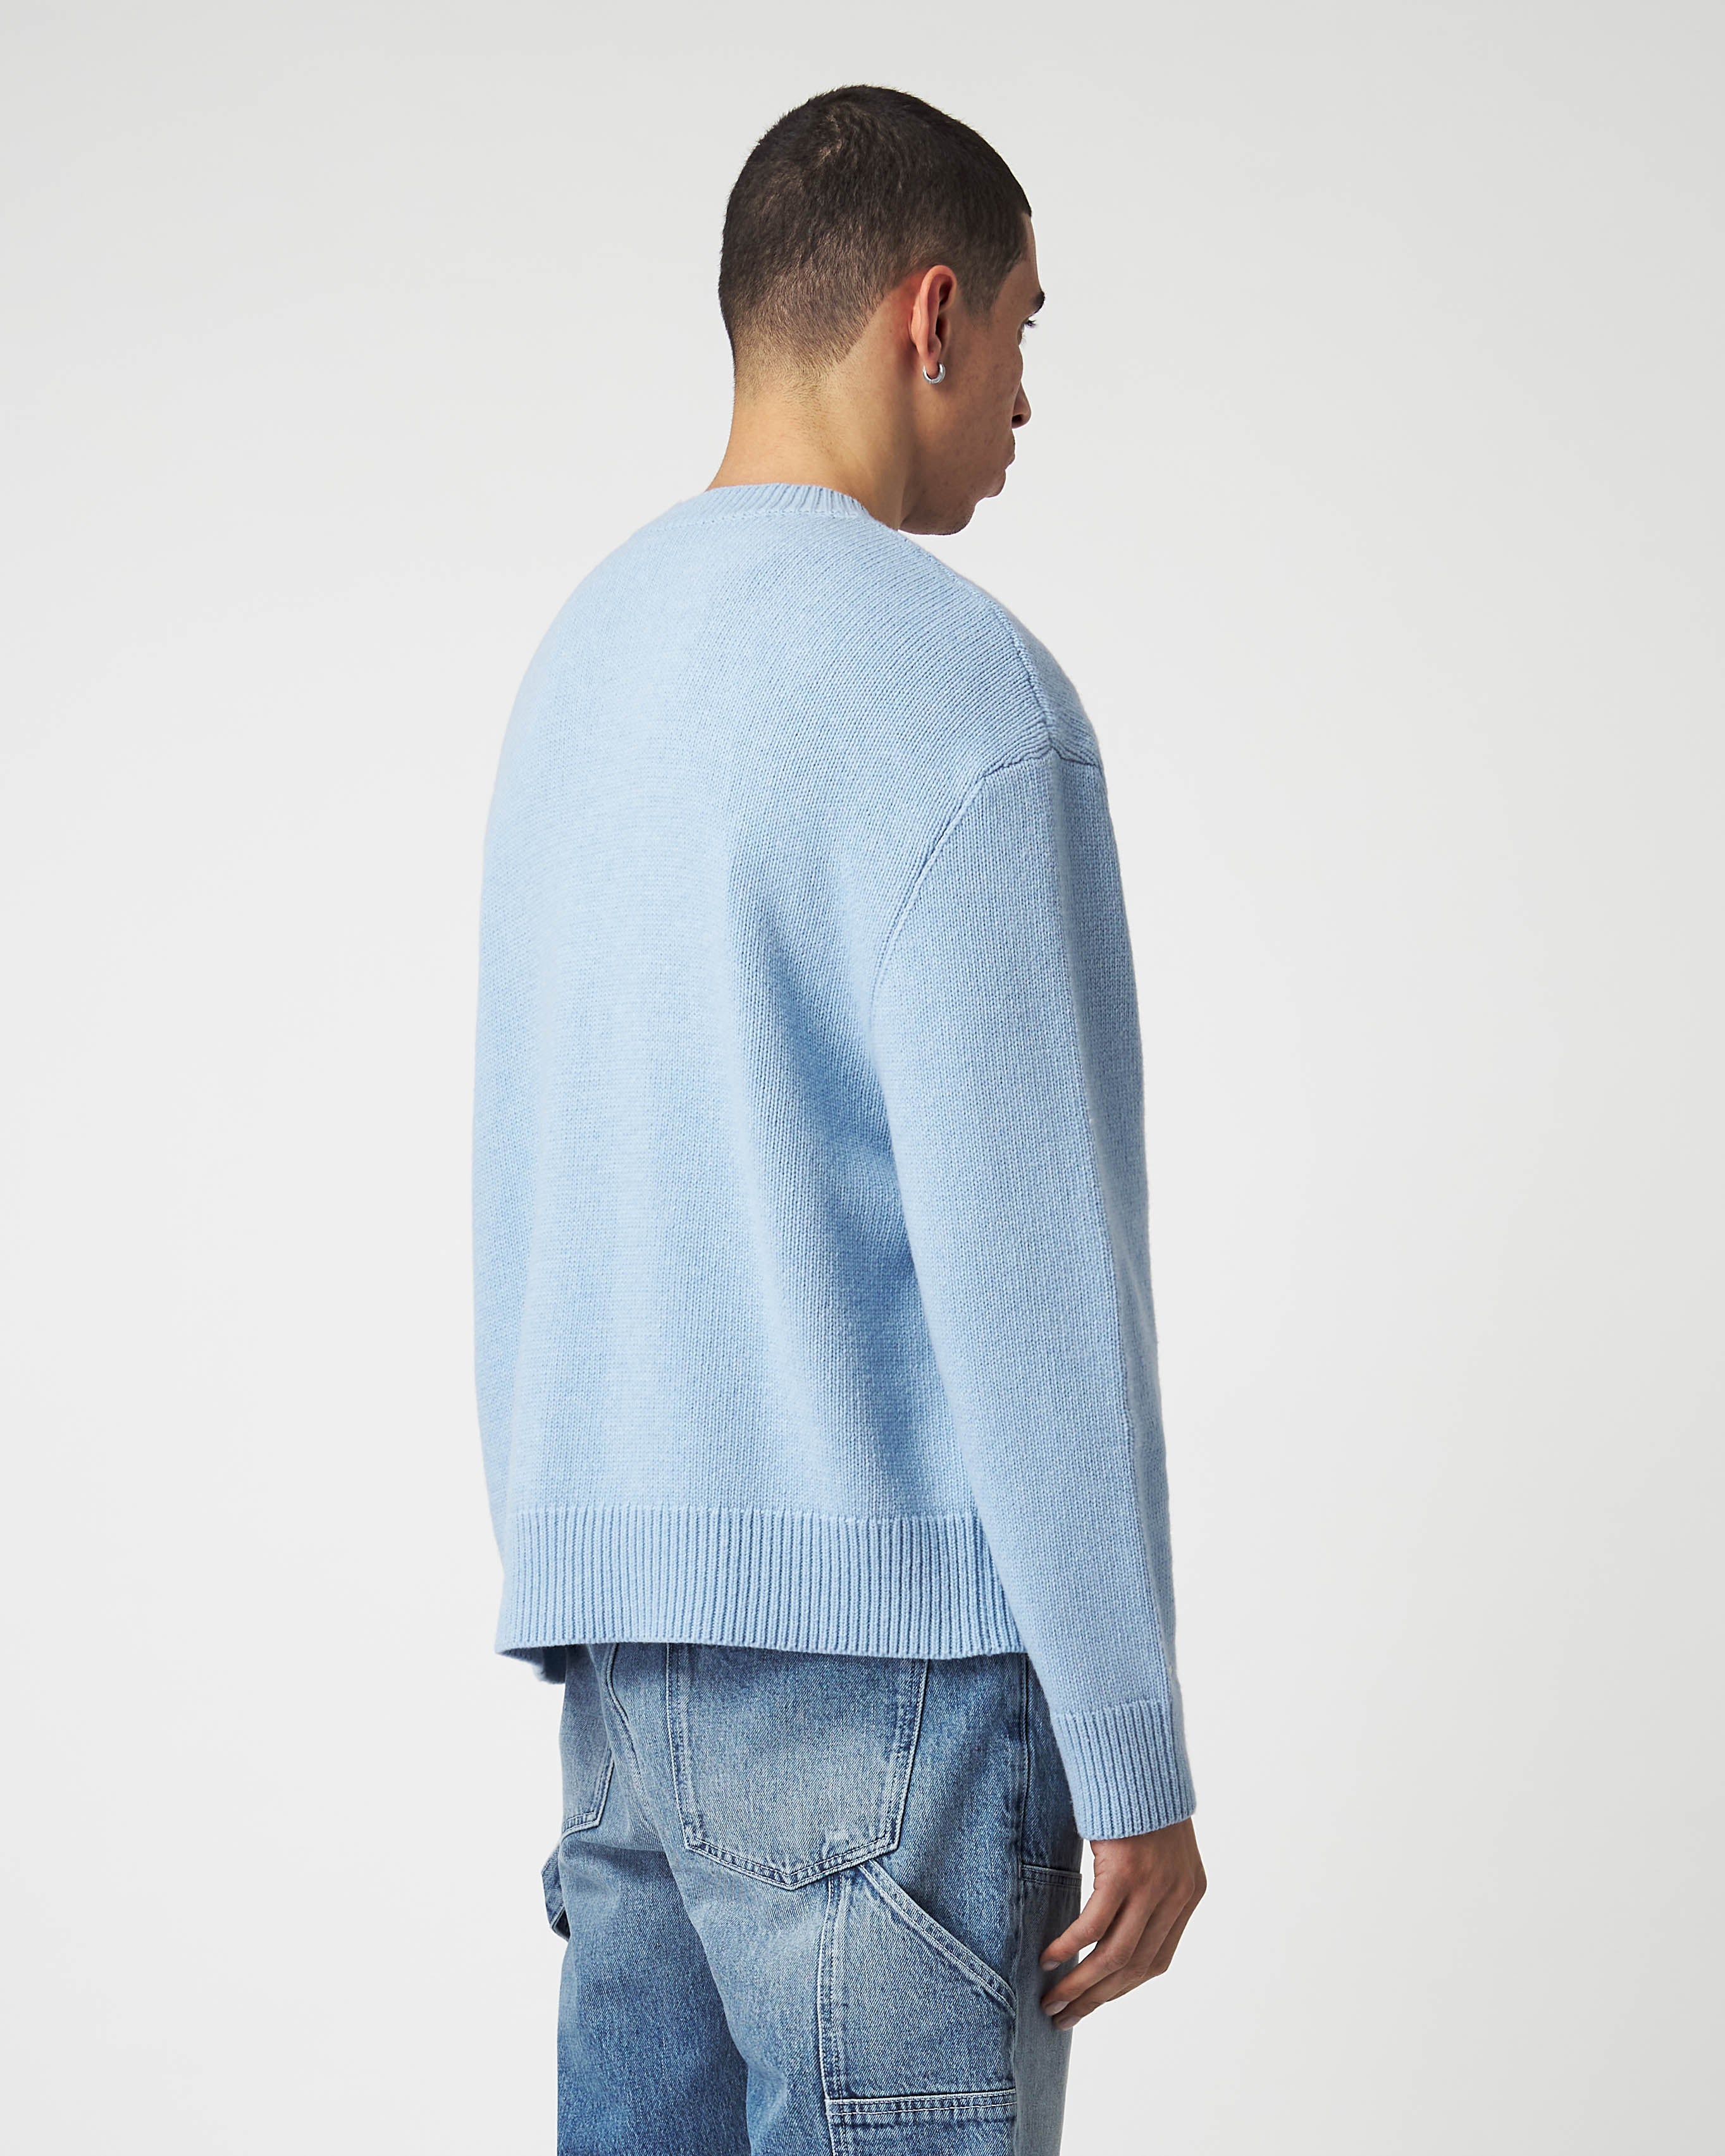 Baby blue knit sweater